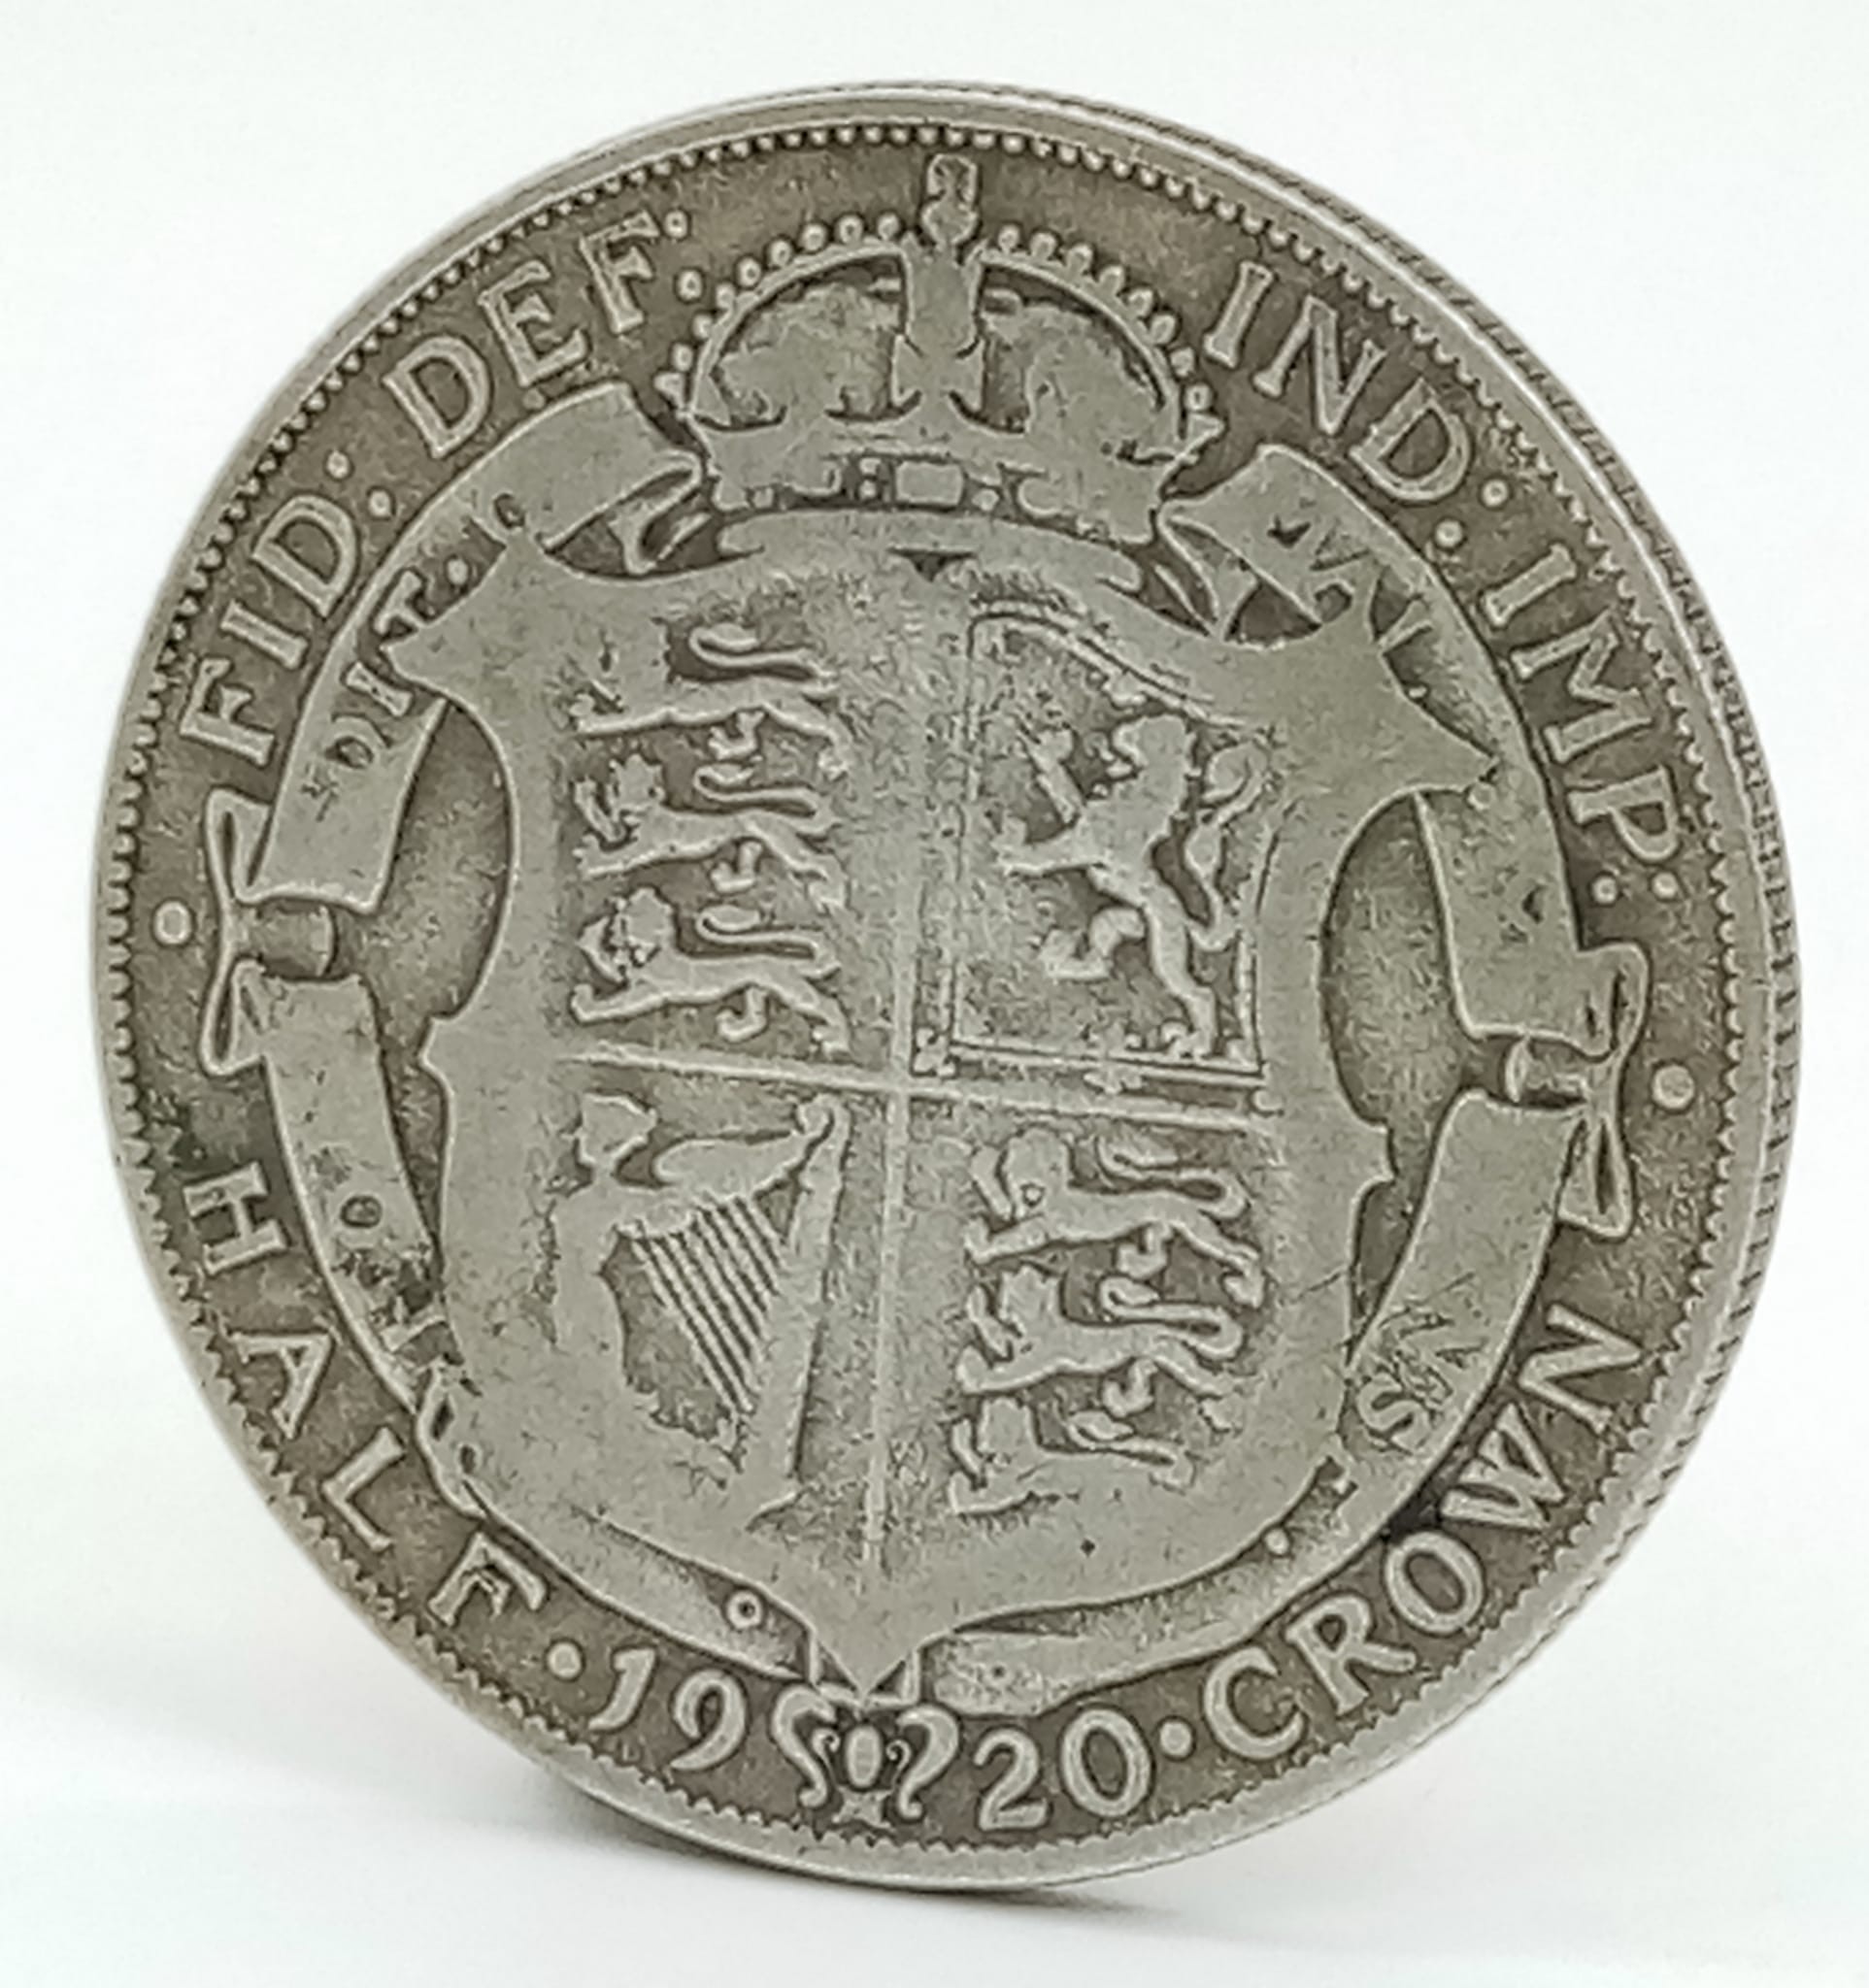 A 1920 Georgivs Half Crown. Please see photos for condition. - Image 2 of 2